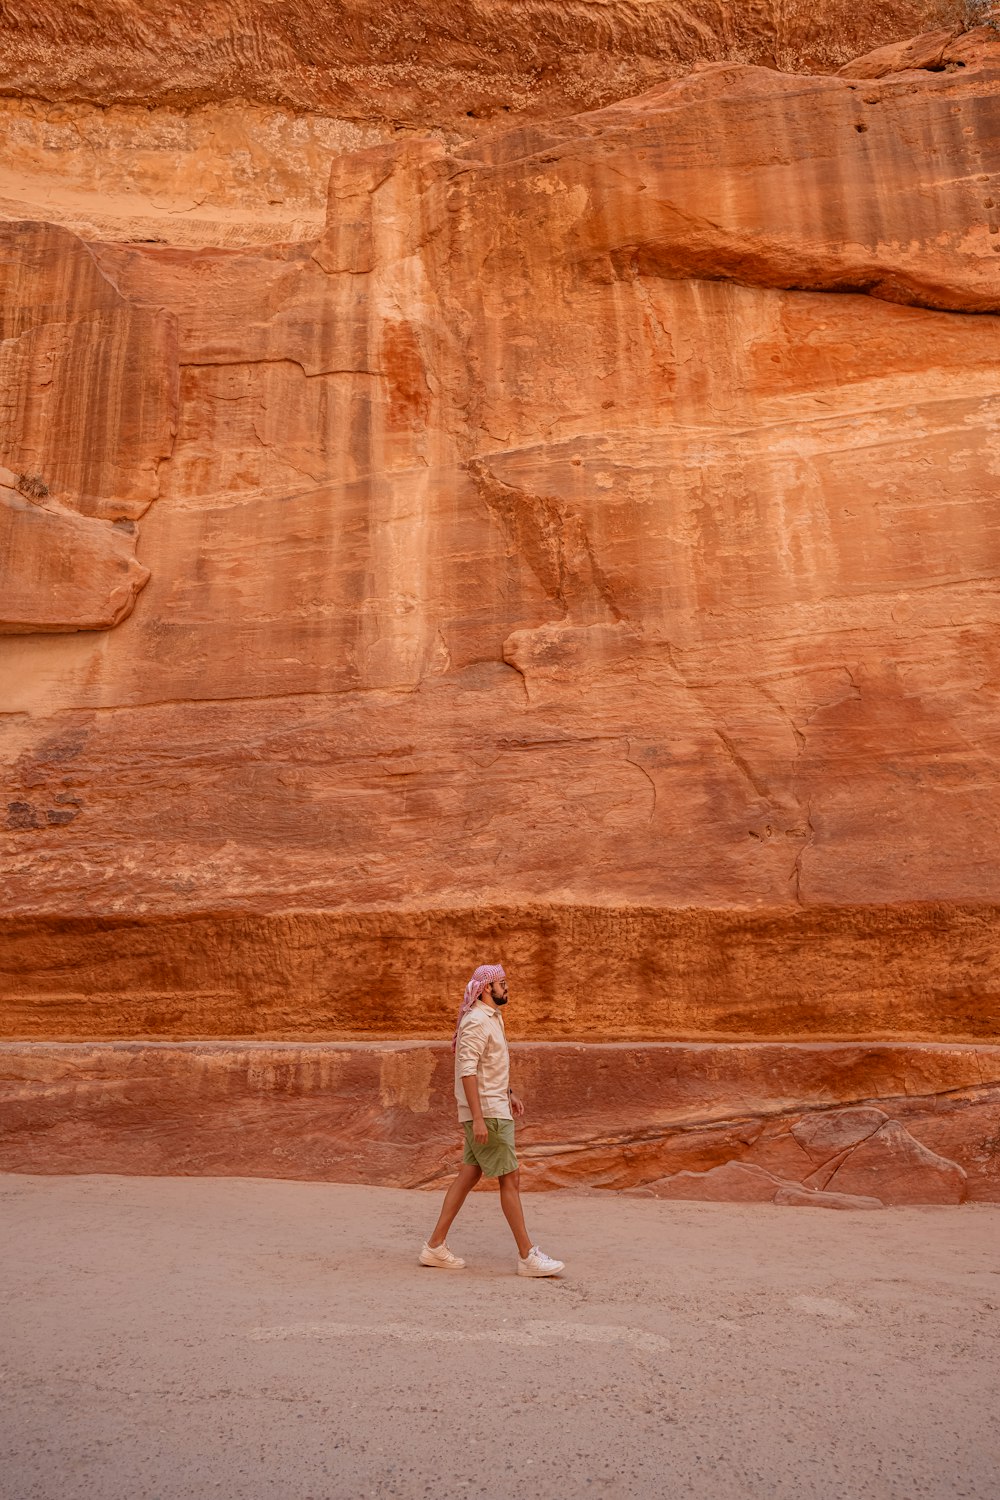 a person walking in front of a large rock formation